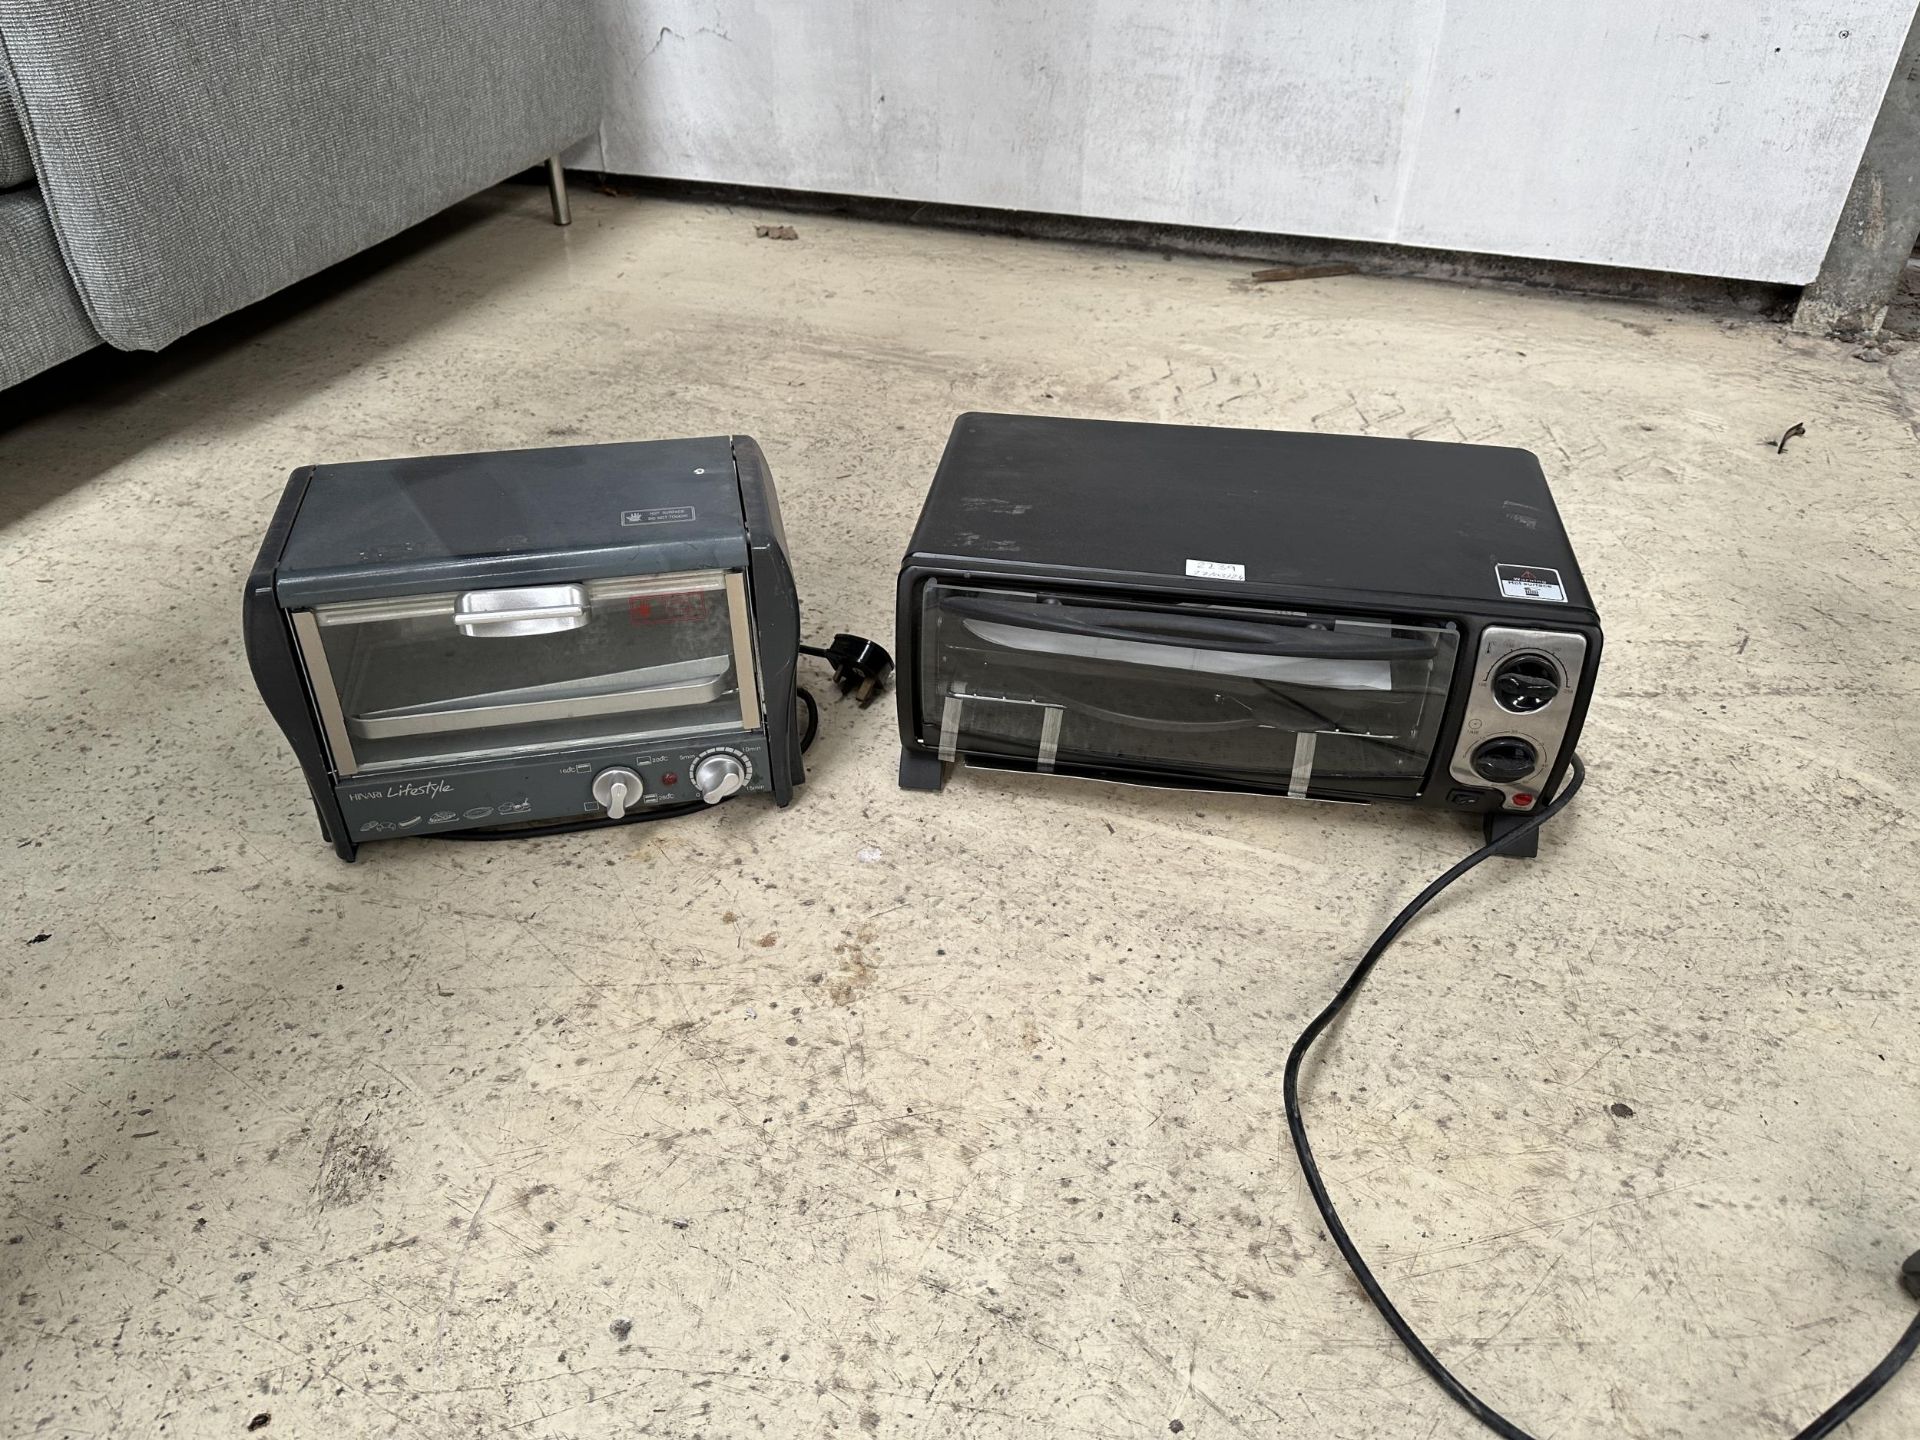 TWO COUNTER TOP MINI OVEN AND GRILLS - BELIEVED UNUSED